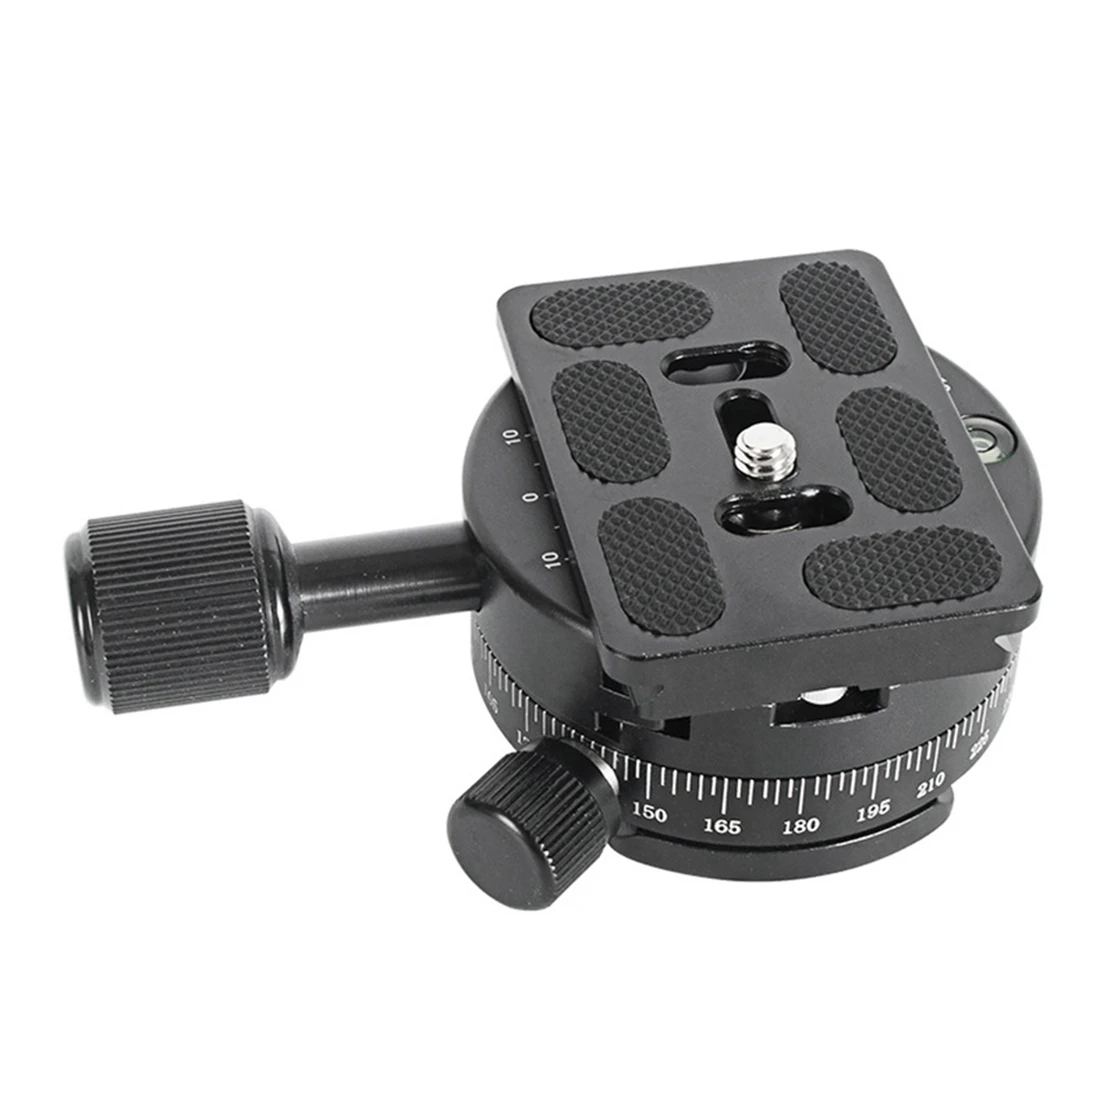 

Camera Clamp Panoramic Clamp Tripod Monopod Quick Release Plate Mount Rotate Clamp for Arca Plate Dslr(QJ01-B)